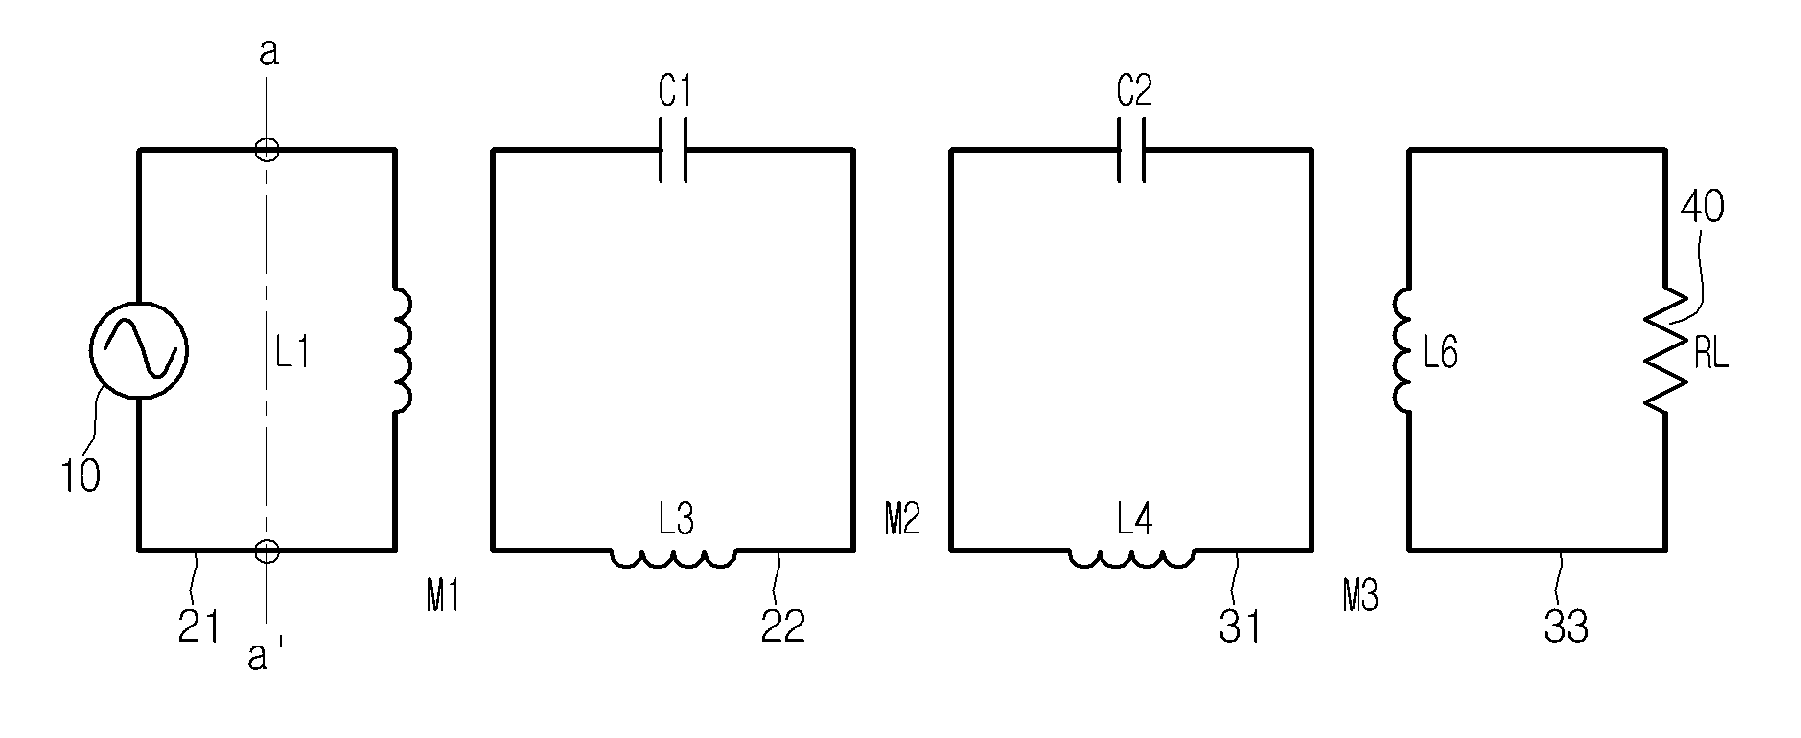 Energy transmission apparatus and method